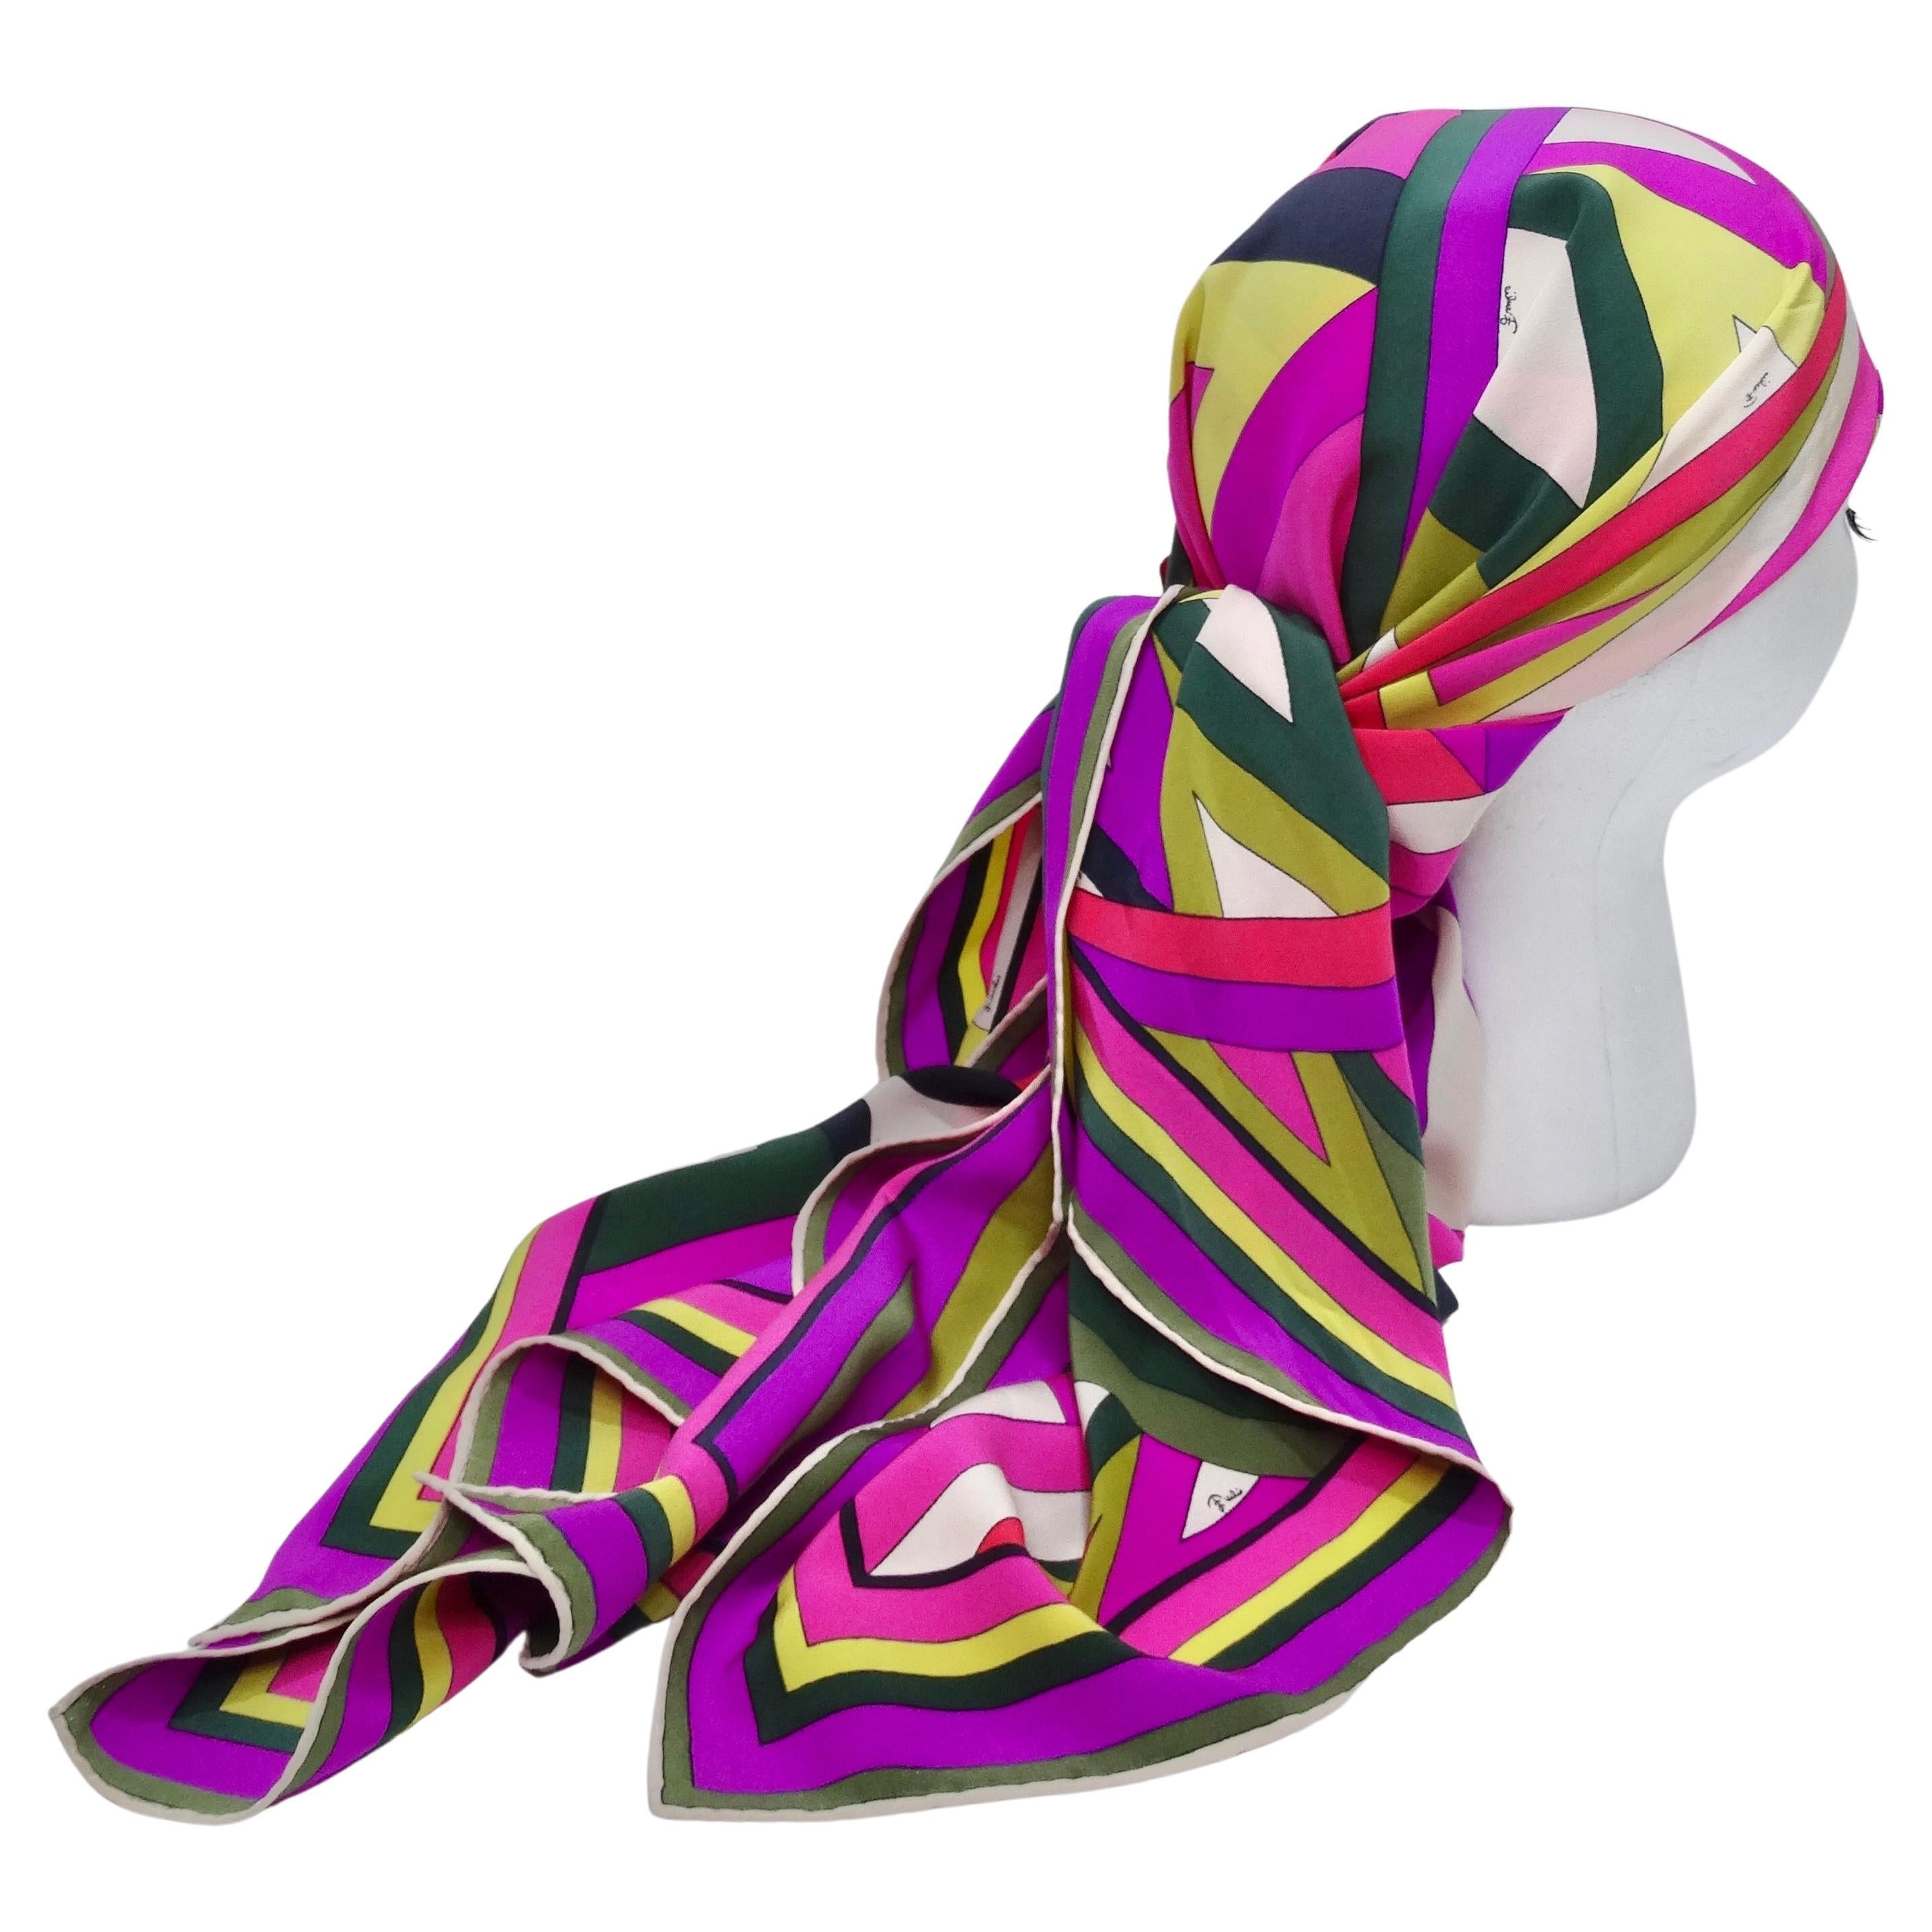 Emilio Pucci has done it again! This is a bold and beautiful scarf that belongs in everyone's closet. Your next vacation is calling, and this will be your new favorite accessory. Wear it, frame it, tie it! Pucci is the king of prints and a brilliant